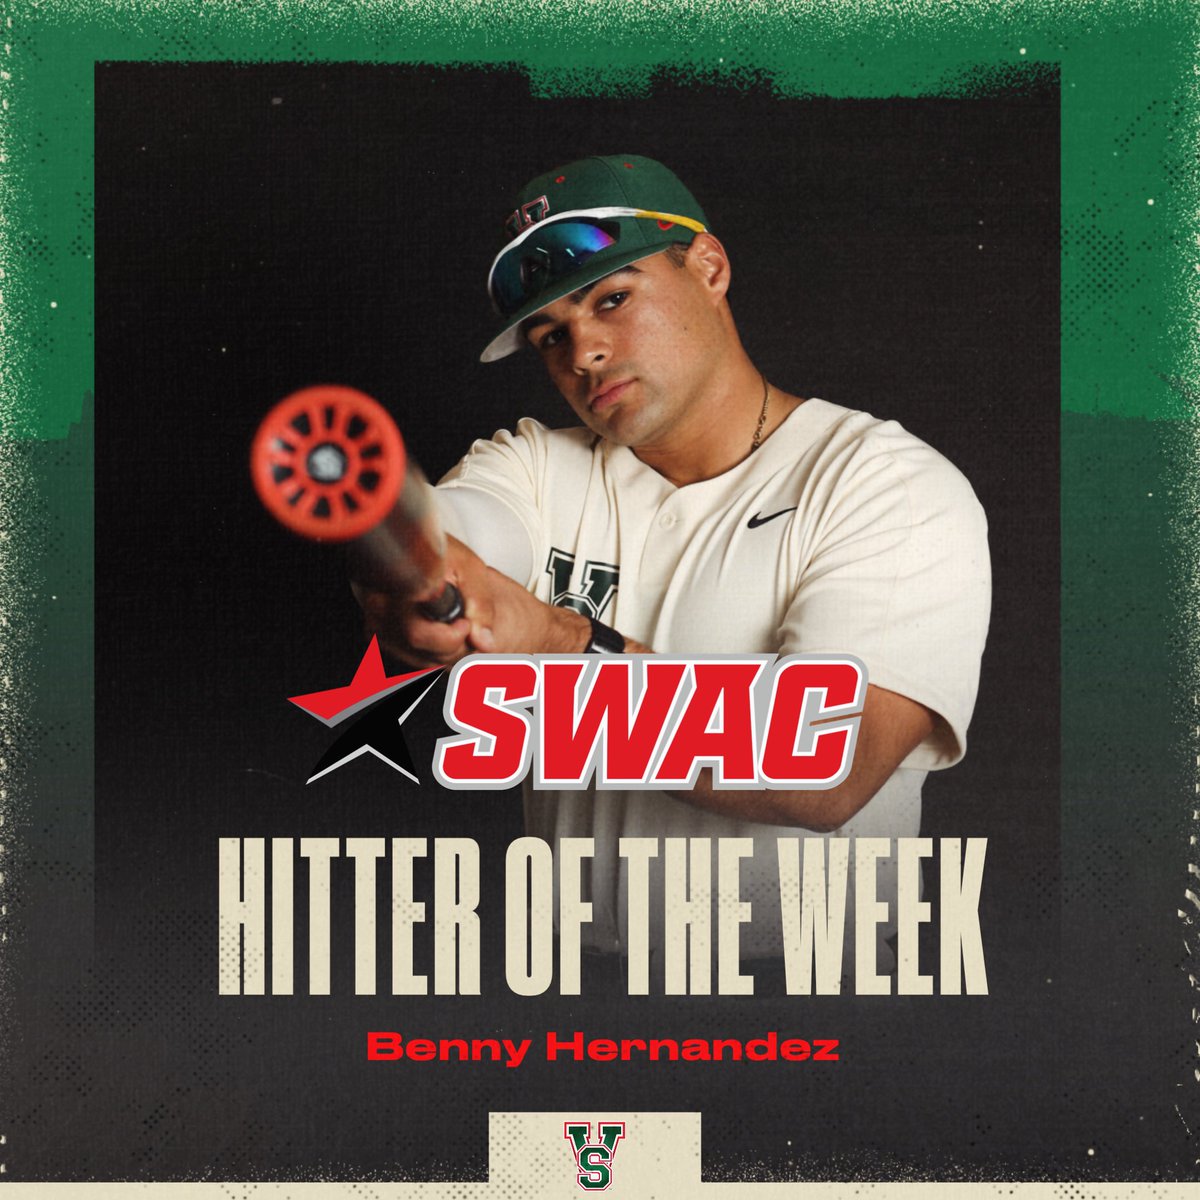 Congratulations to Benny Hernandez on being named @theswac hitter of the week! Benny stats this past weekend: .500 BA (6-for-12), 2 HR, 1 double, 9 RBI, and 5 runs scored #Elevate